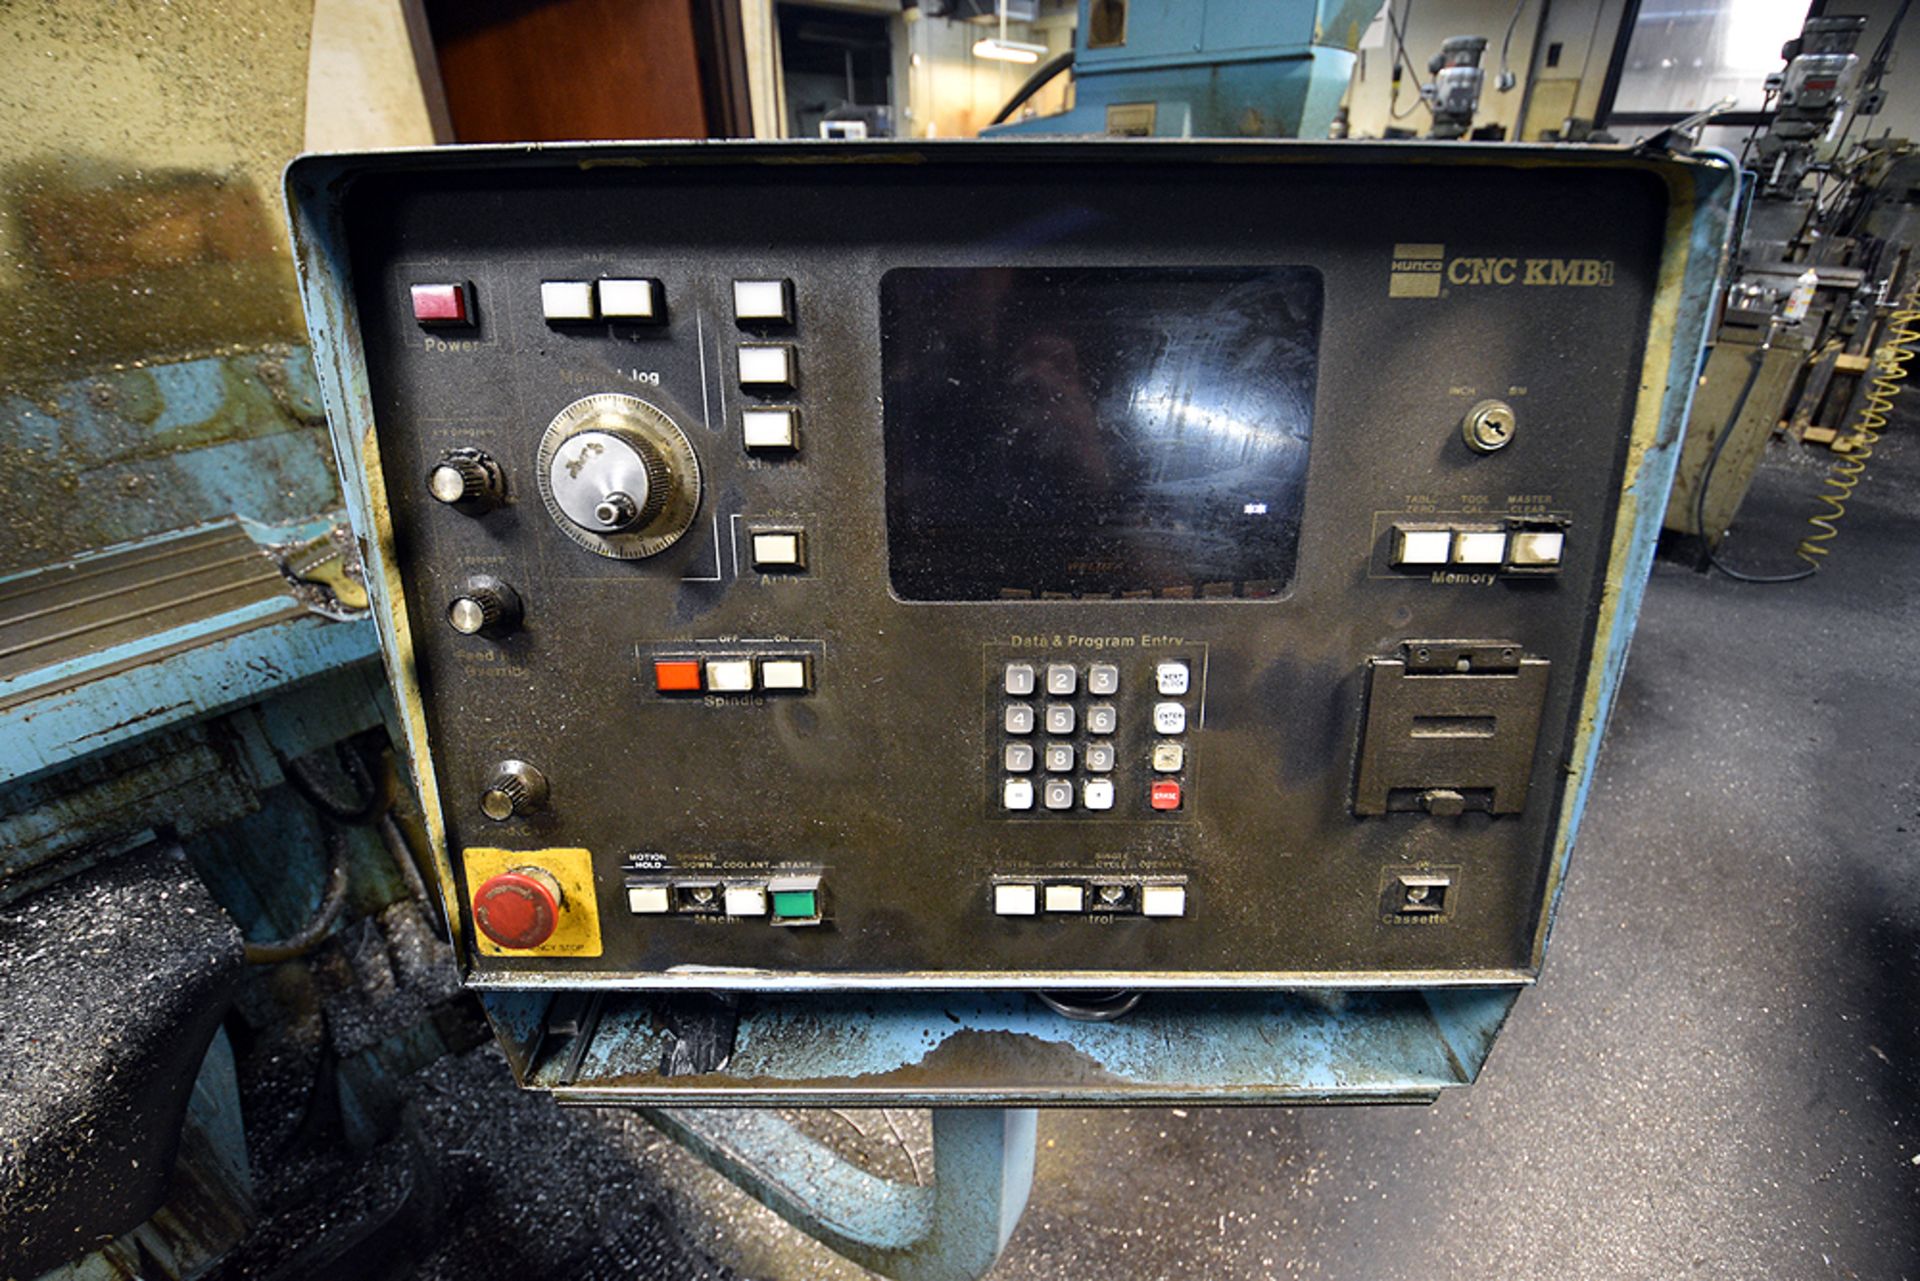 Hurco KMB1 CNC Vertical Milling Machine, 38" Table, 6" Milling Vise, s/n KX-8010063-A - Image 3 of 4